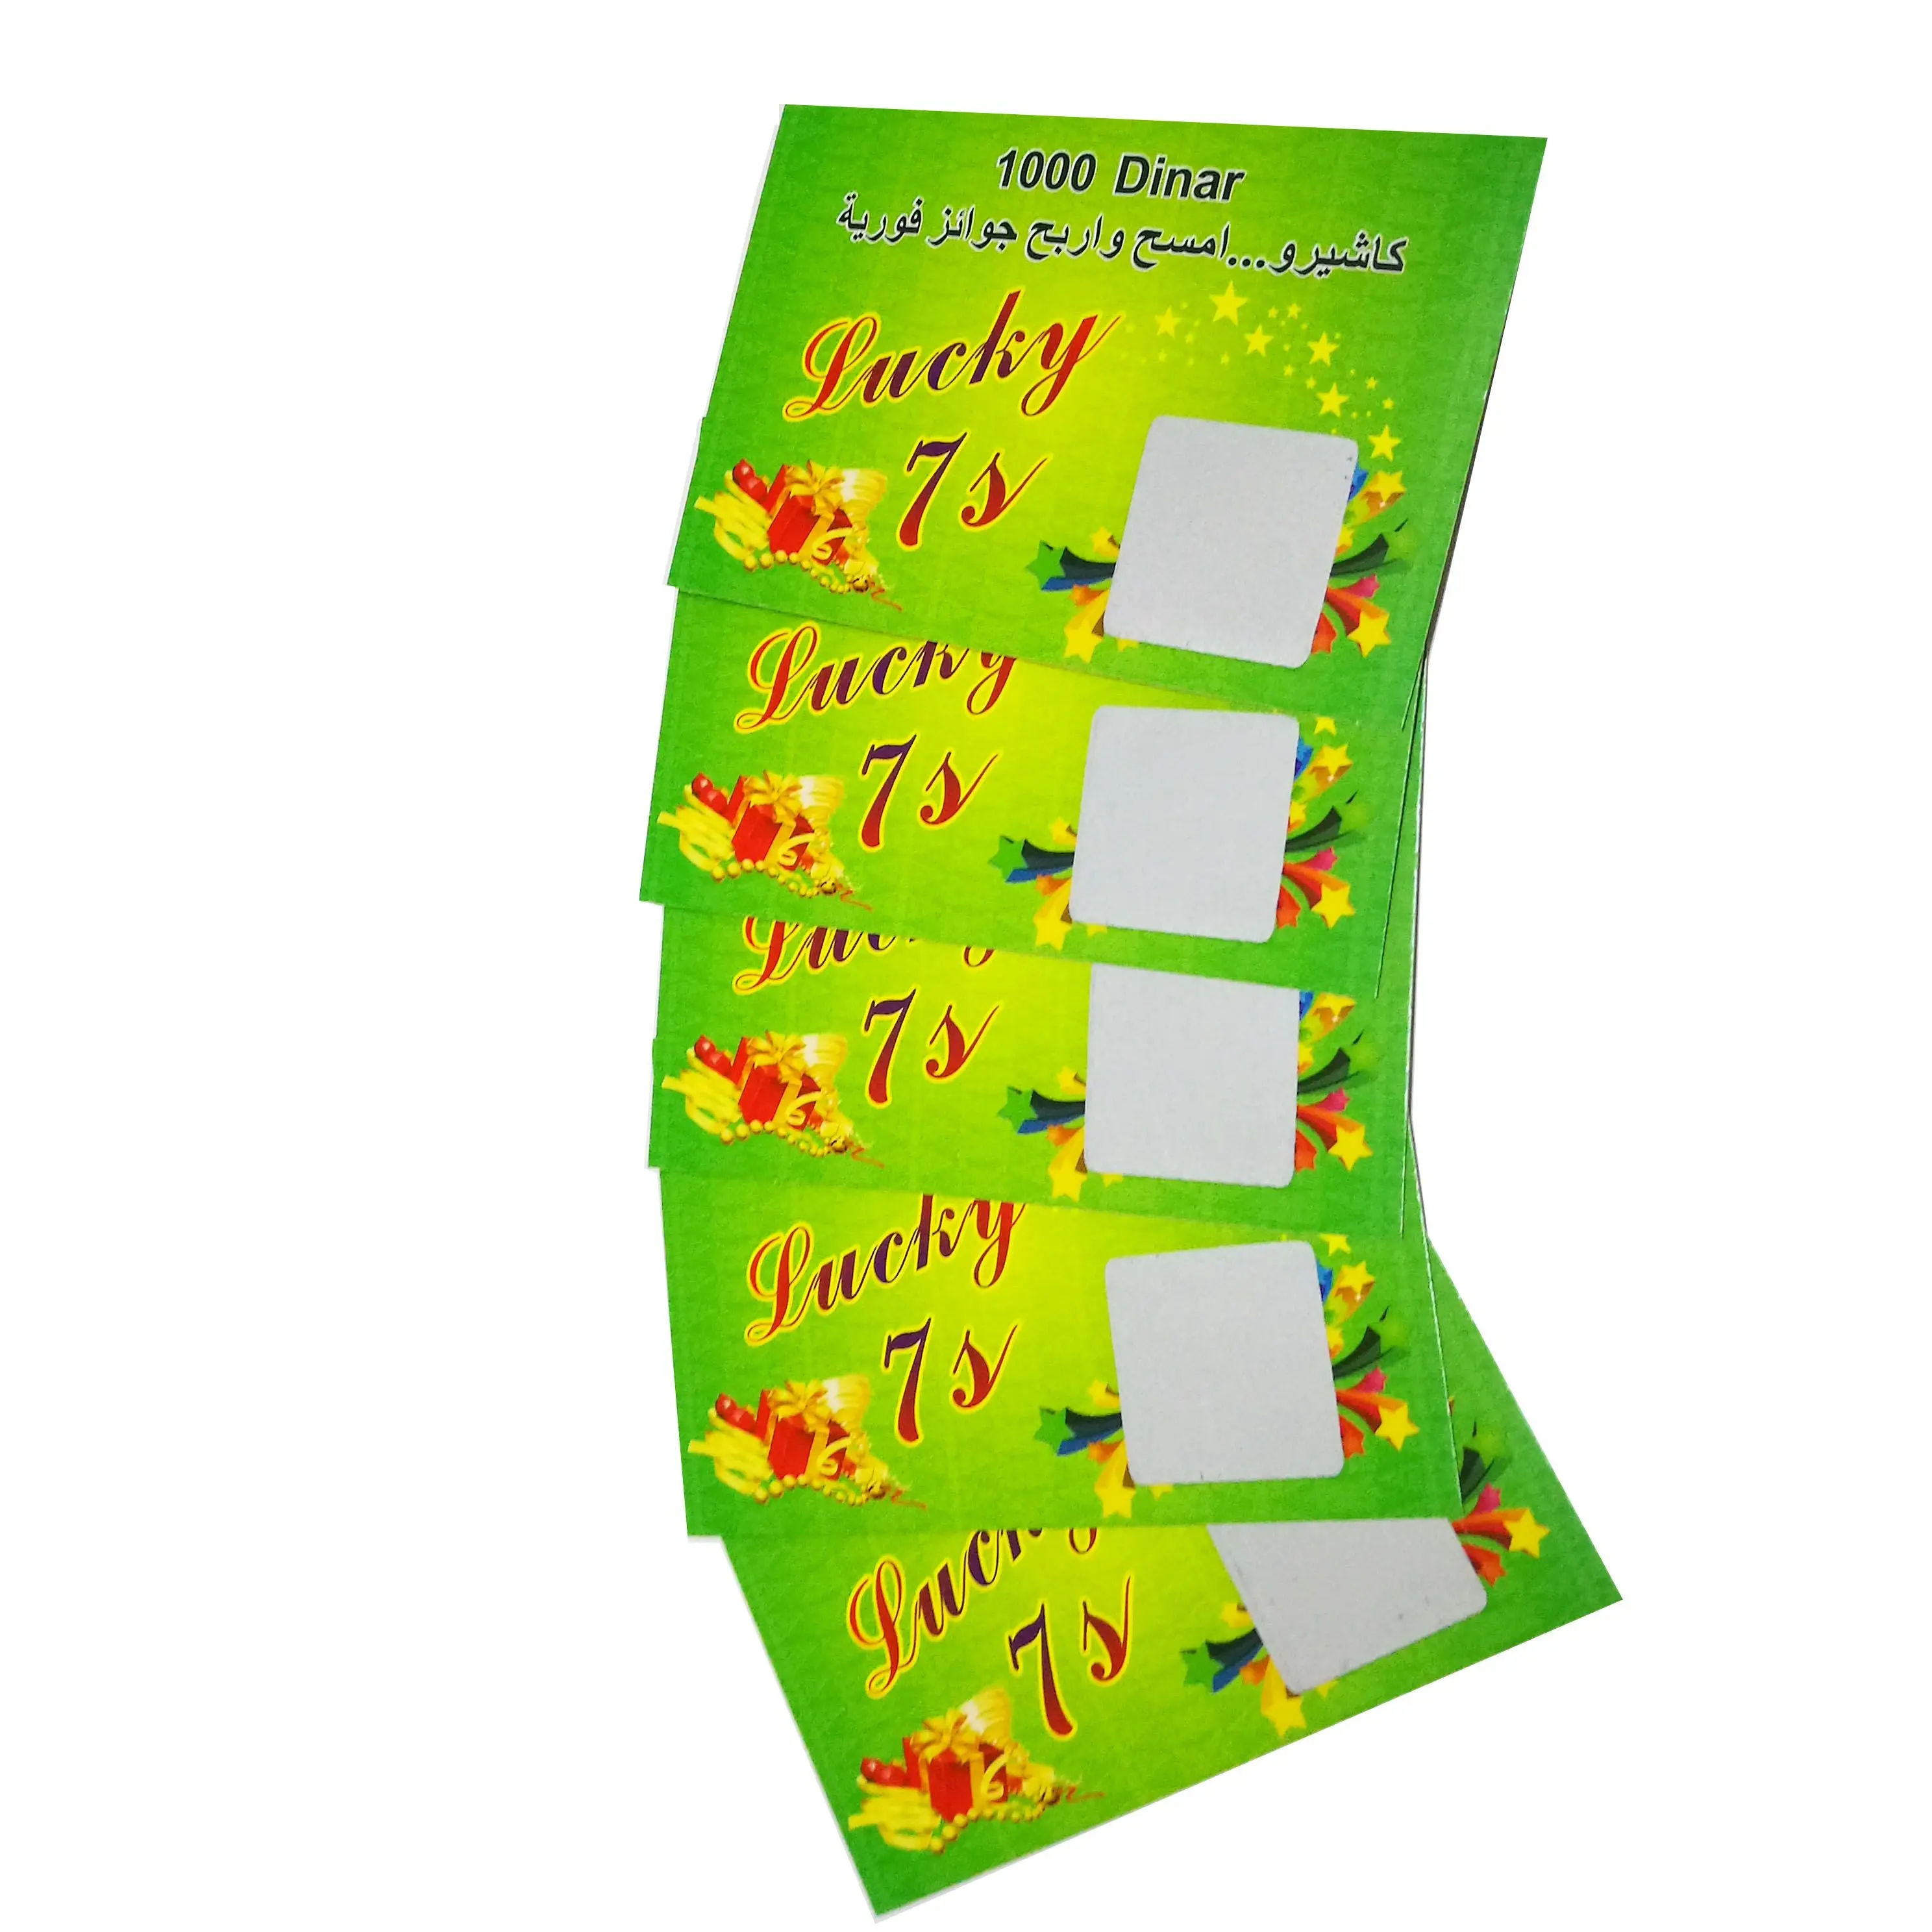 anti-counterfeiting scratch card paper and security 3D hologram Stickers